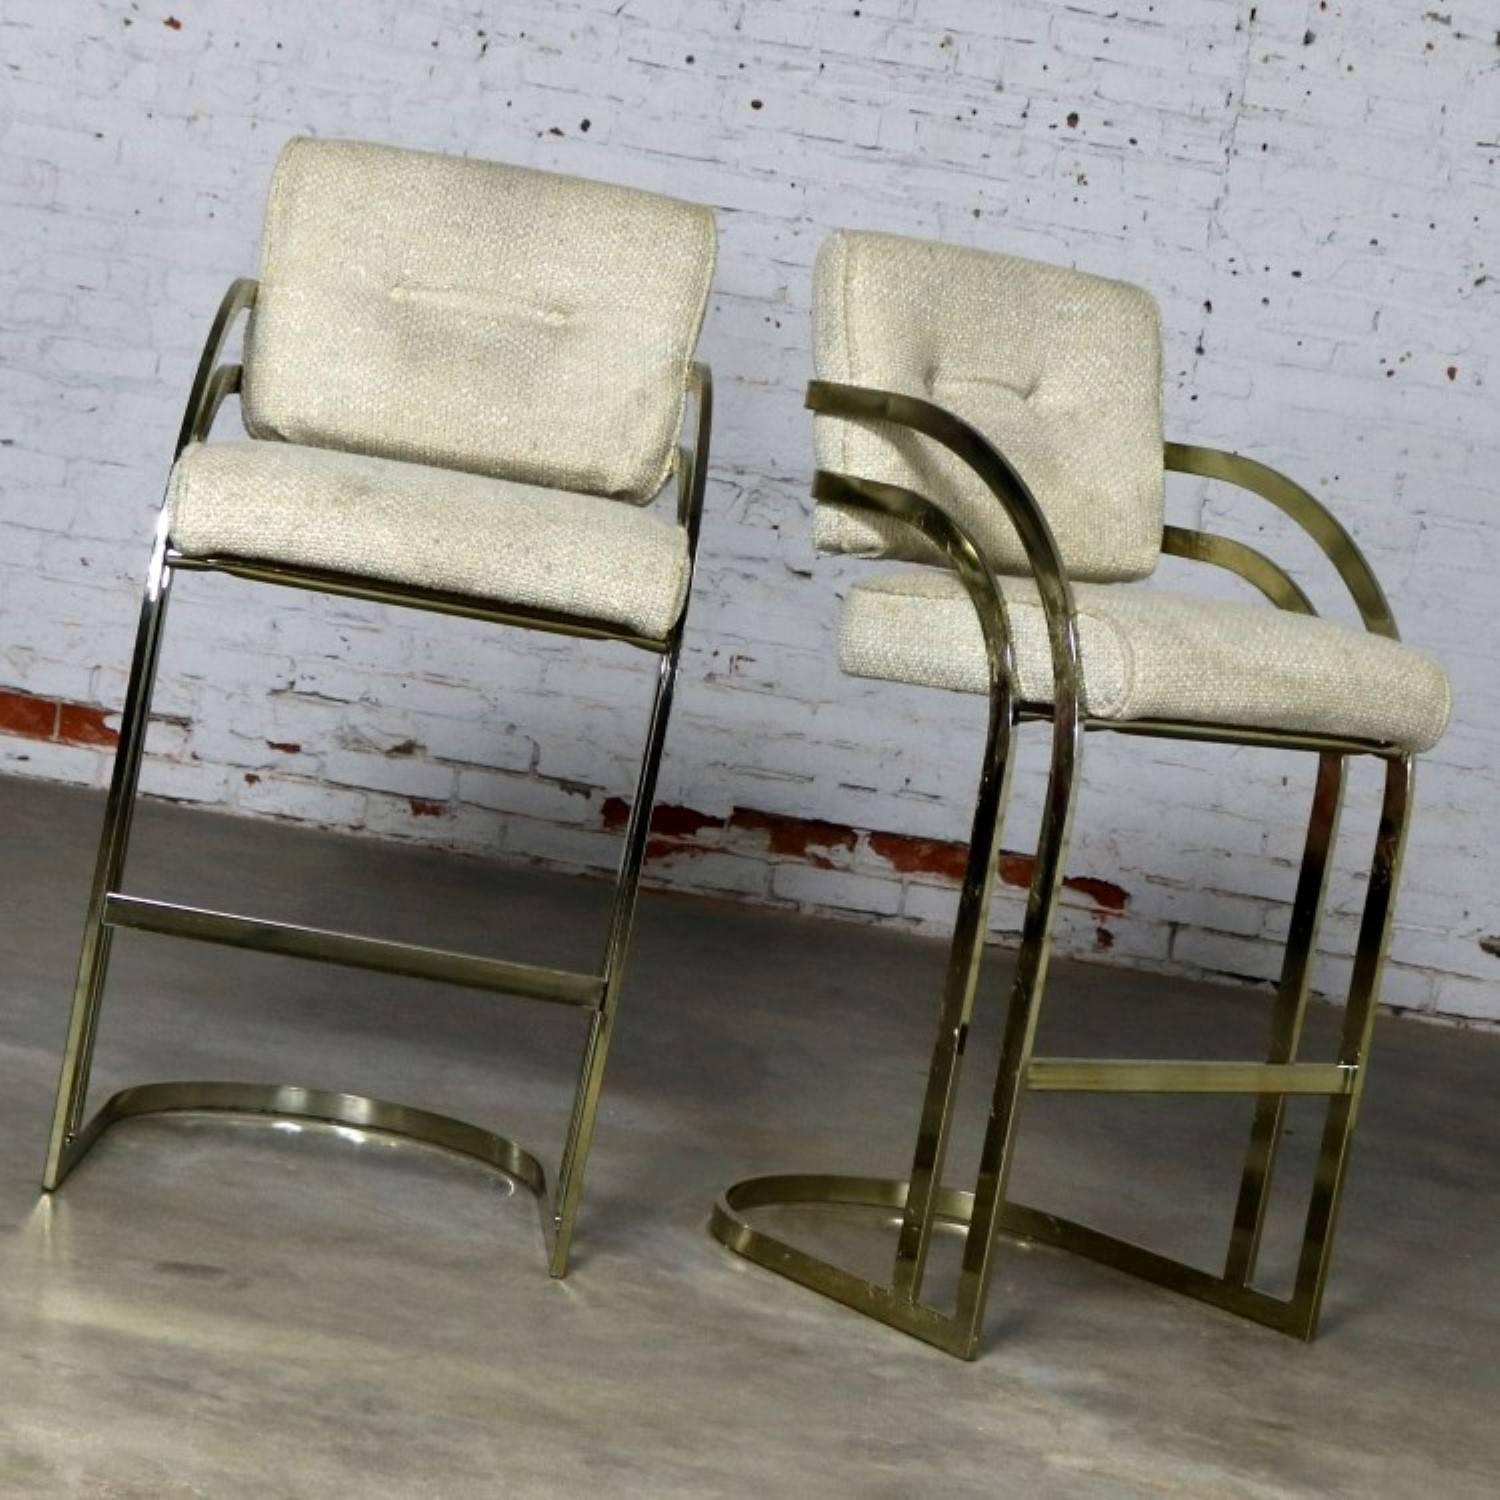 20th Century Pair of Milo Baughman Style Cantilever Brass Plated Bar Stools MCM